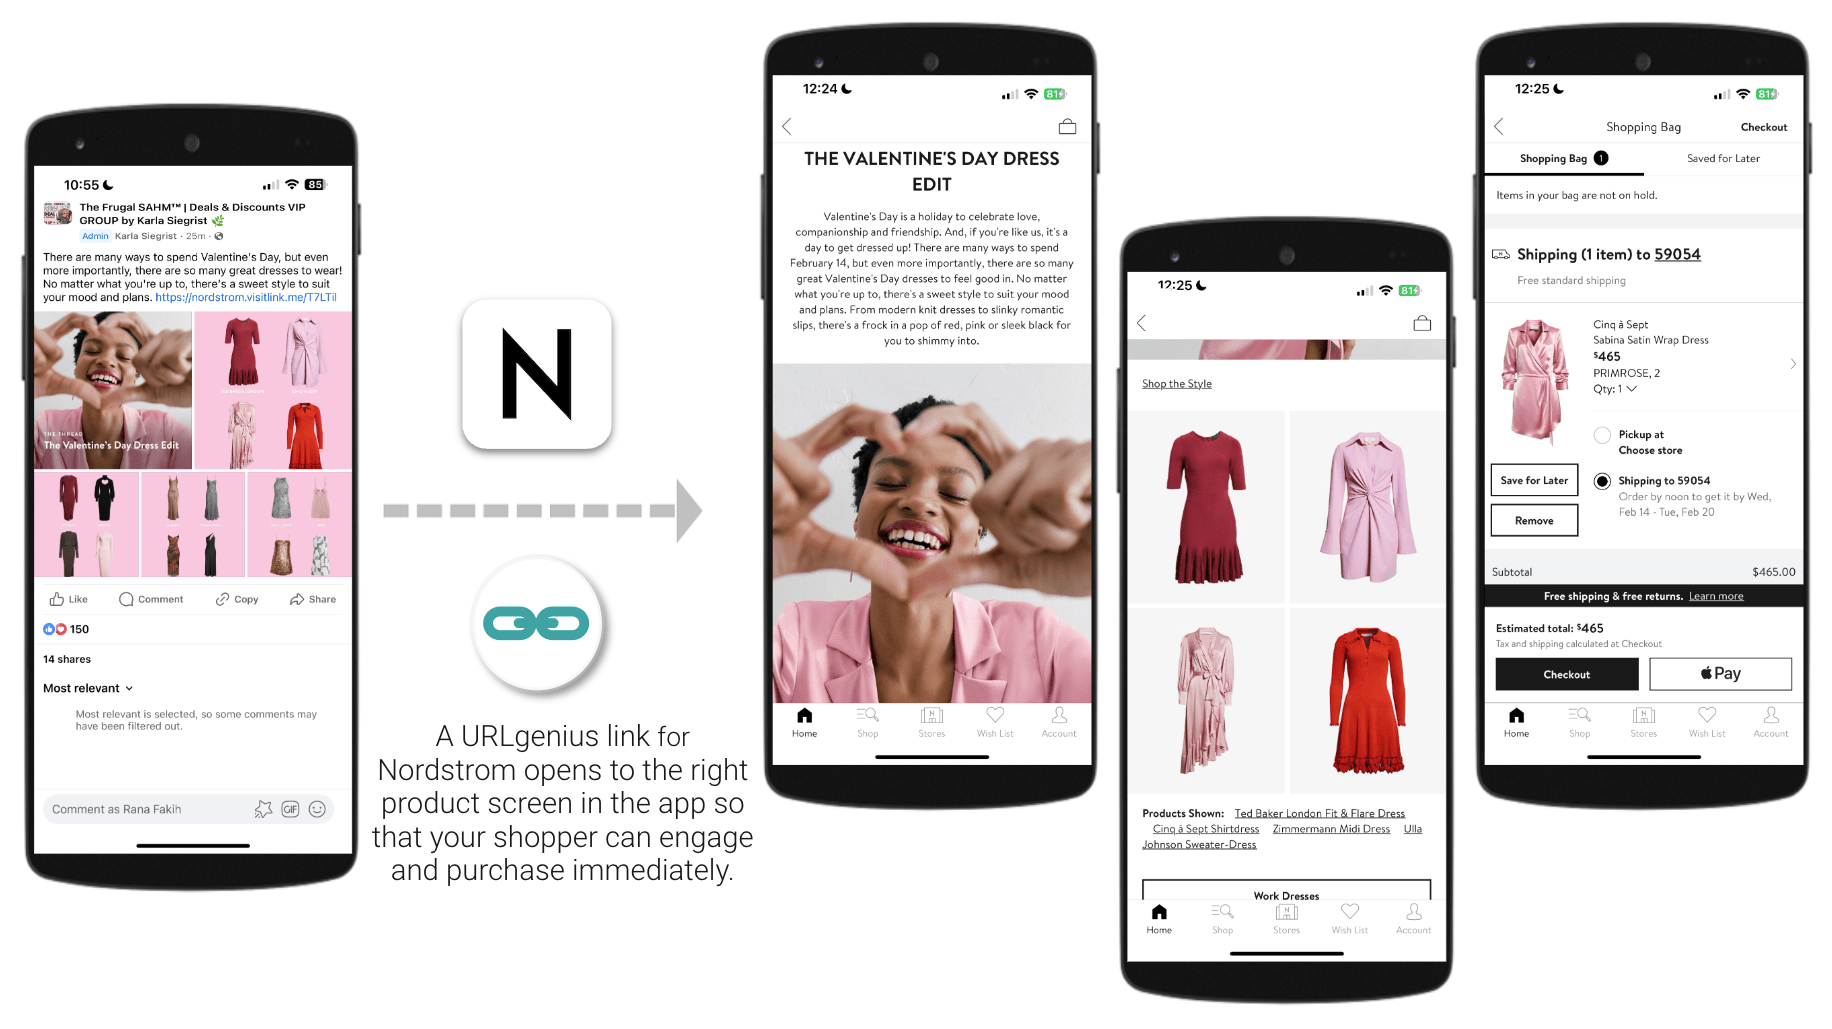 How to Generate Nordstrom Affiliate Links to Open the App from Facebook Groups